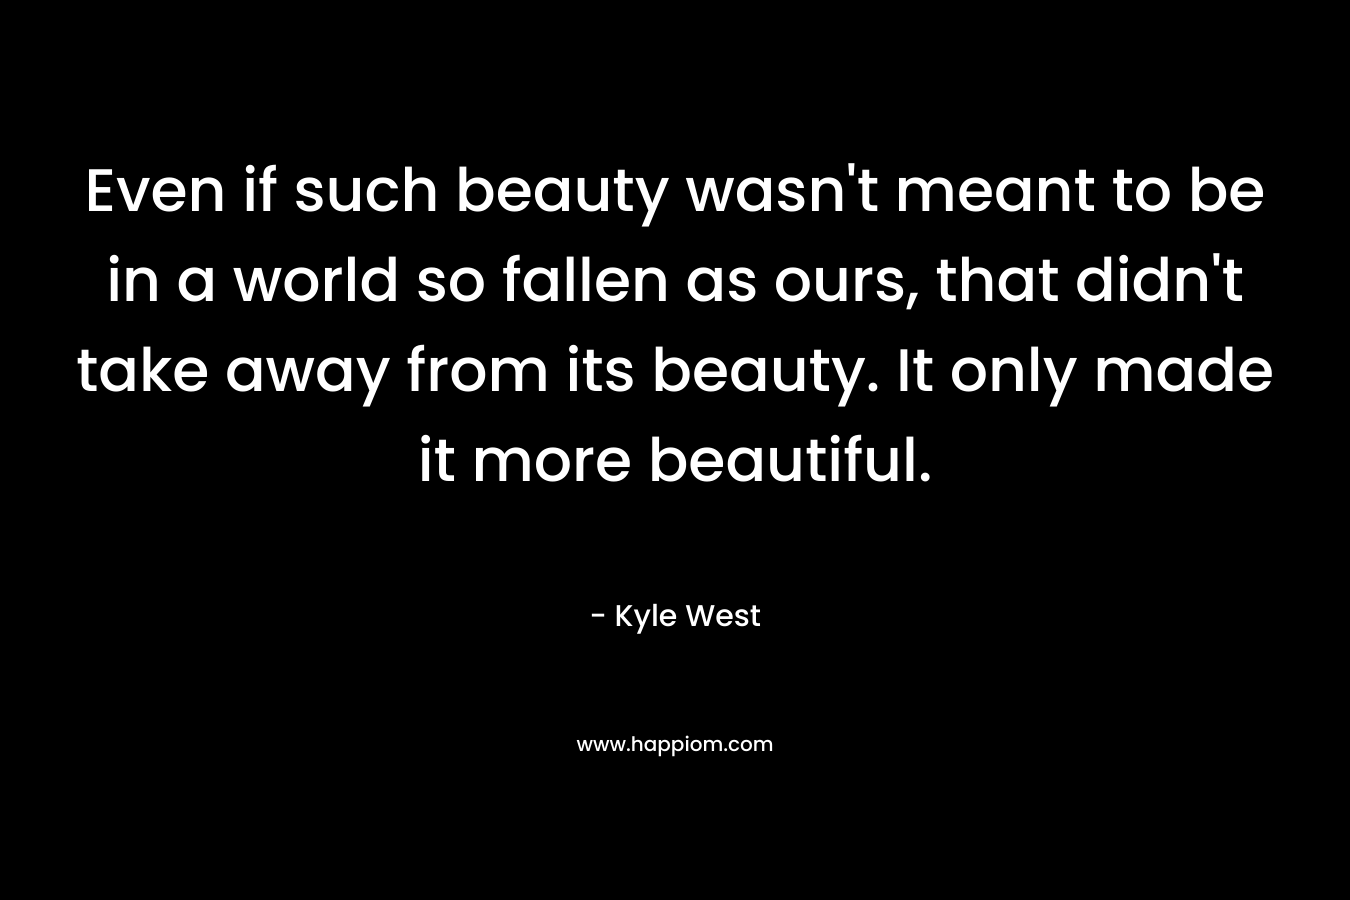 Even if such beauty wasn't meant to be in a world so fallen as ours, that didn't take away from its beauty. It only made it more beautiful.